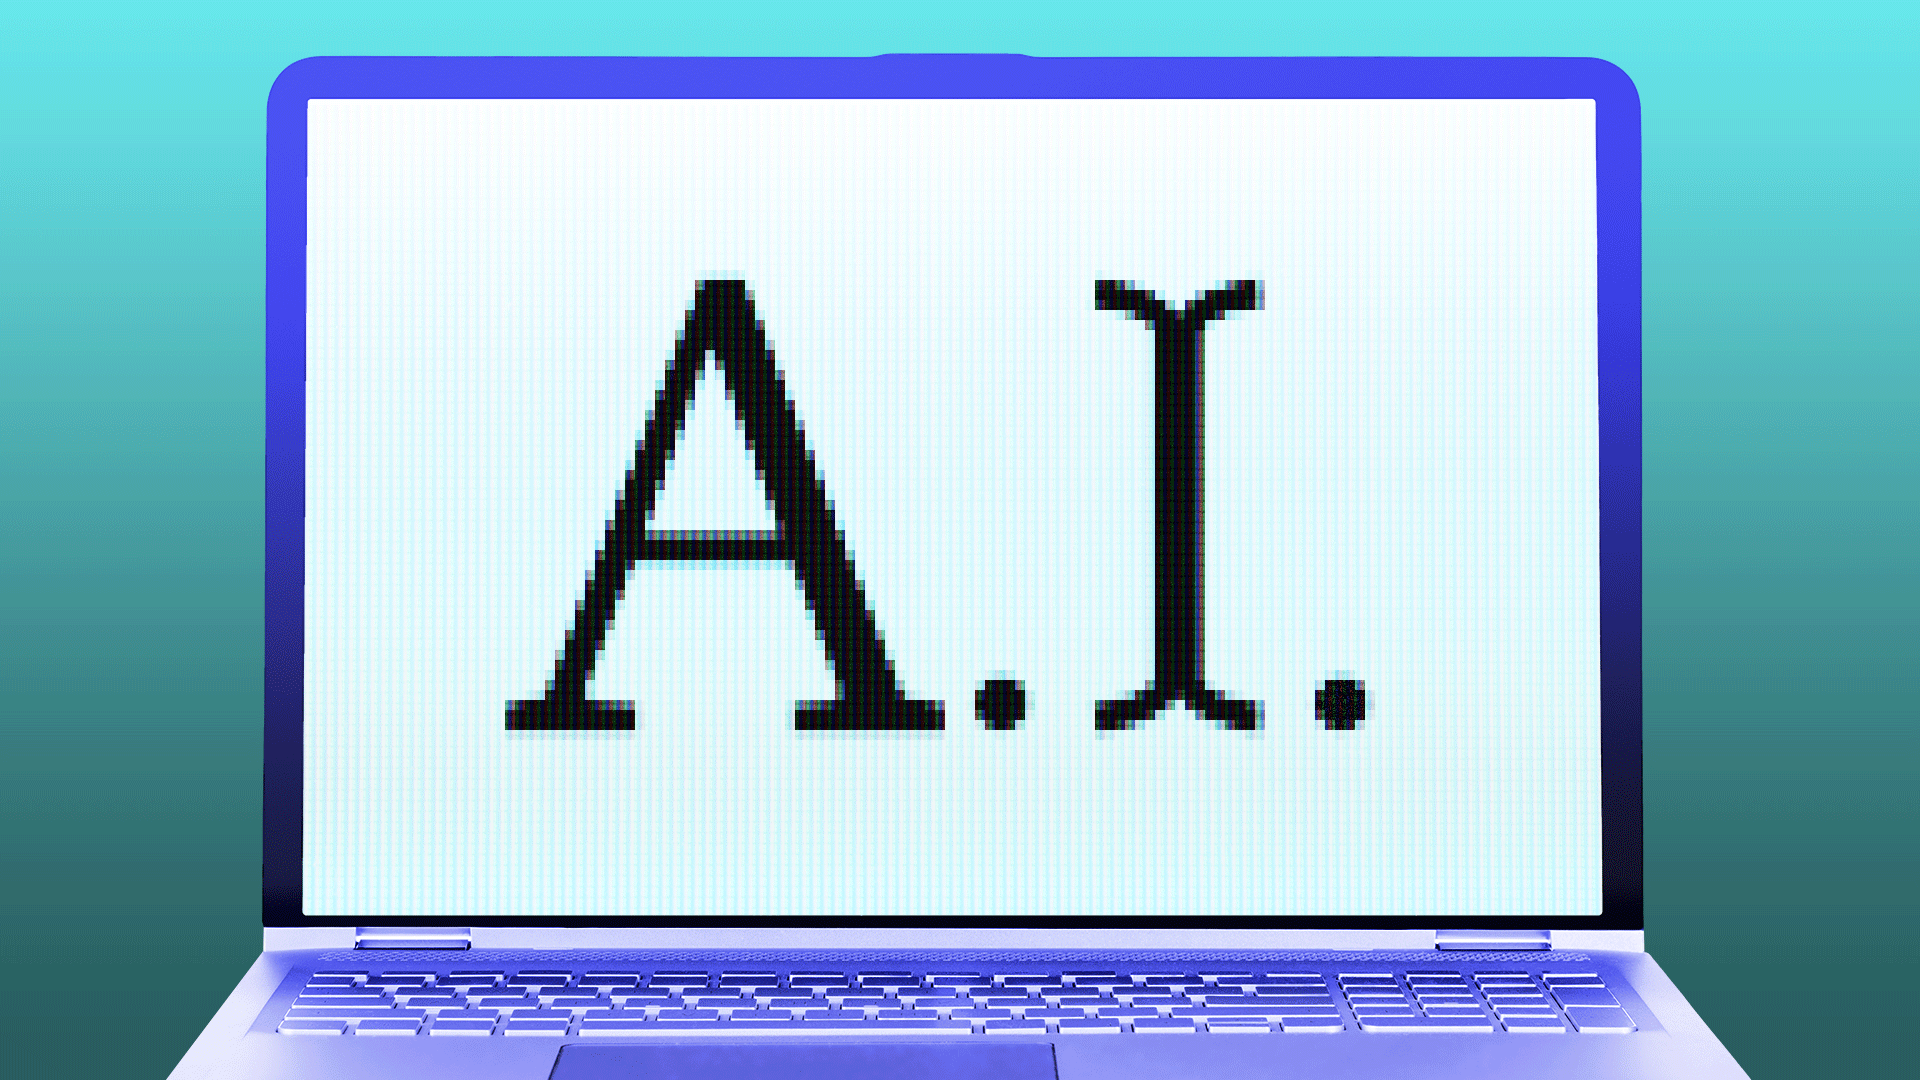 Animated gif of a computer screen that says "artificial intelligence" and "I" as a blinking cursor